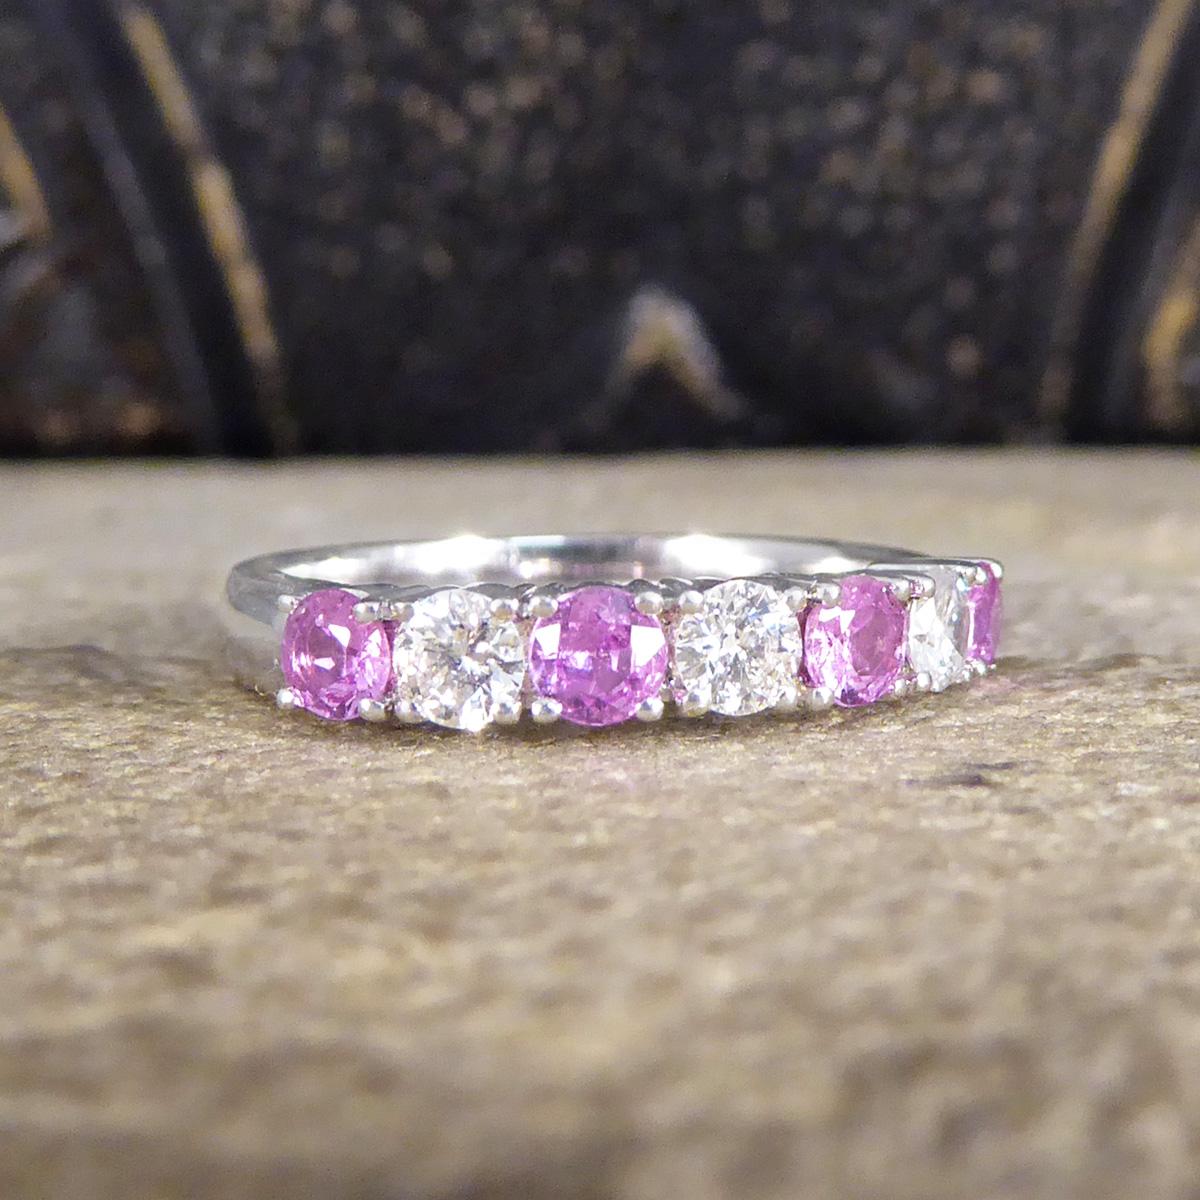 A colour twist on the classic eternity band. This ring features four Pink Sapphires alternating with clear and bright Brilliant Cut Diamonds spanning the head of the finger allowing the stones to sparkle from all angles. There is a total of 0.48ct